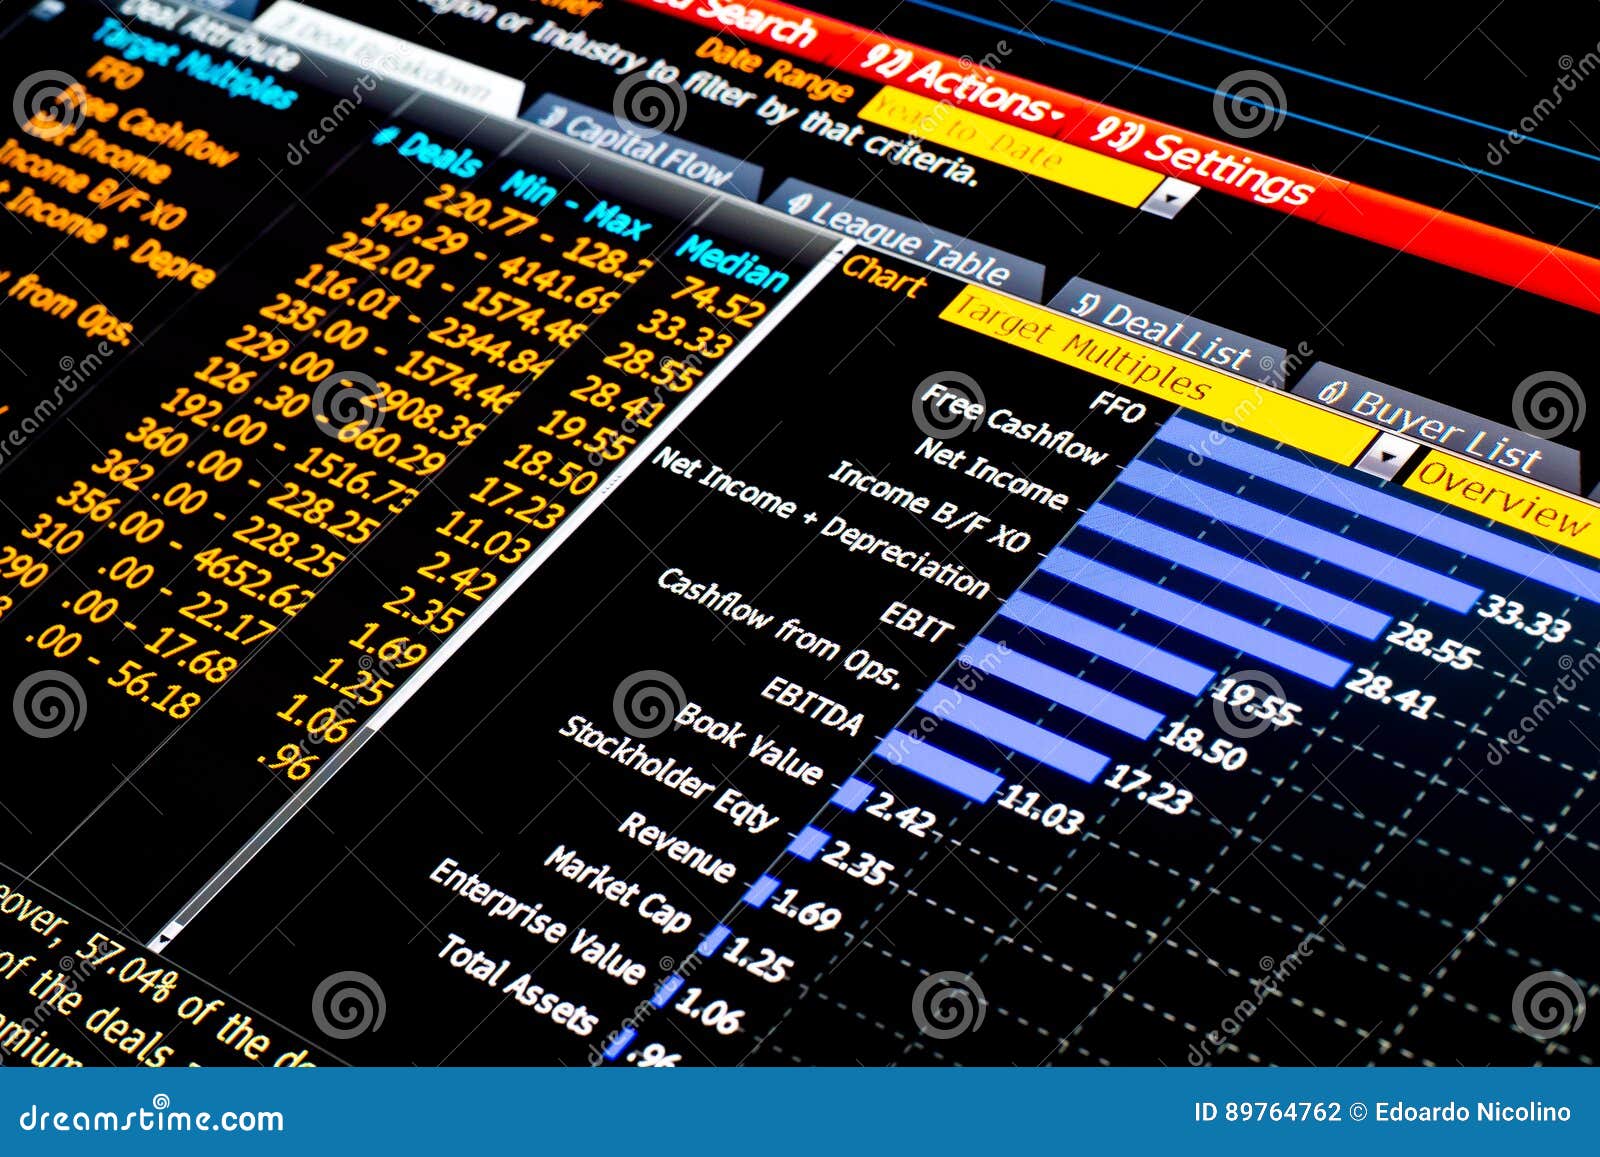 Equity Analysis Software Screen For Trading Stock Photo Image of